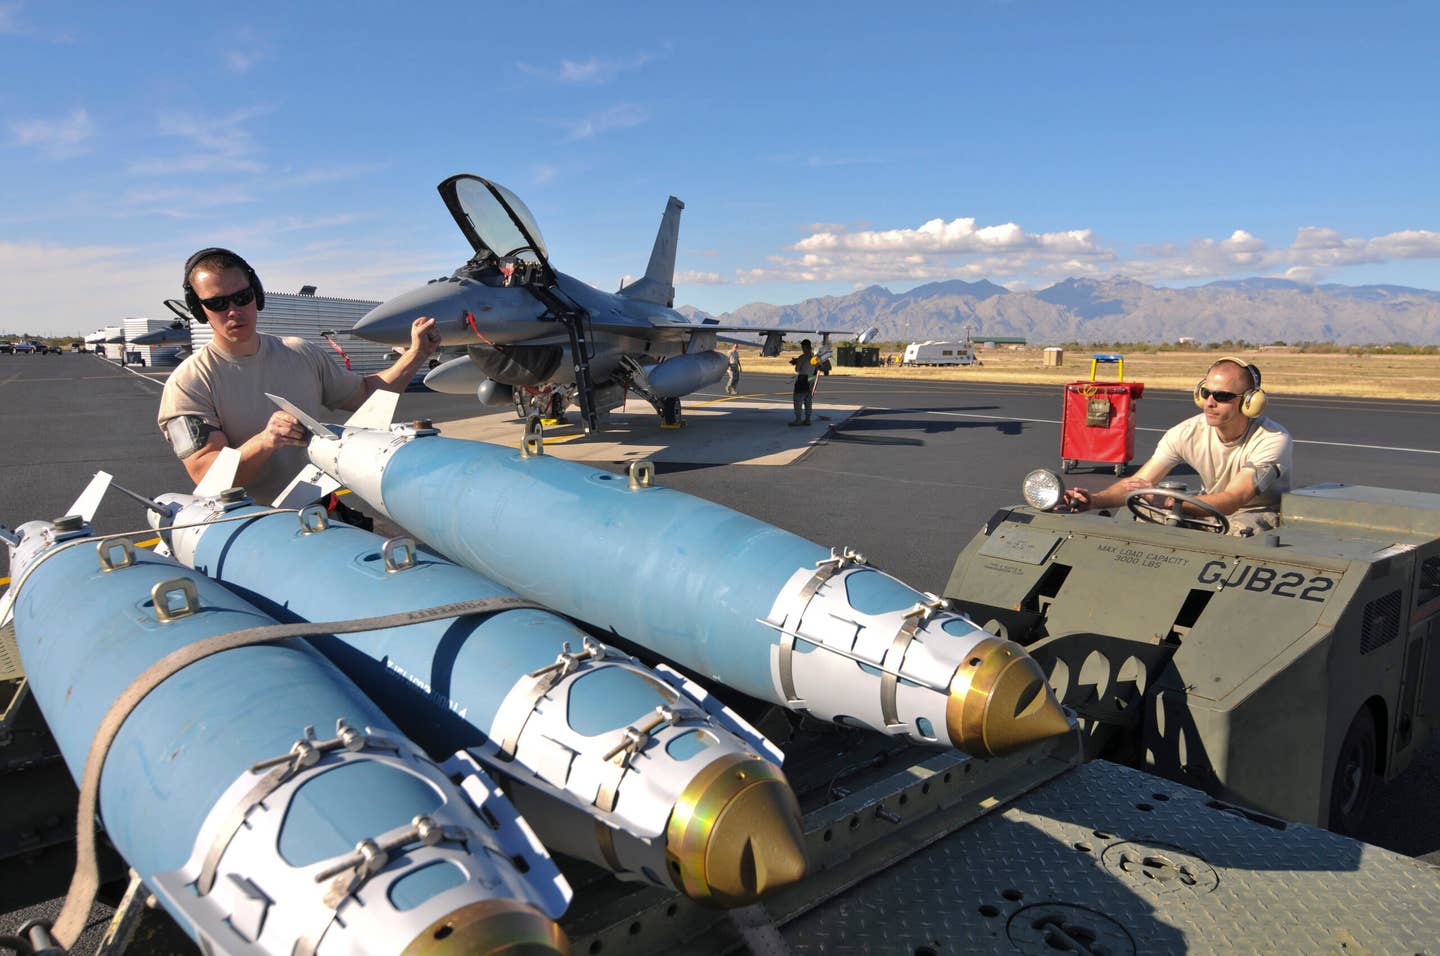 U.S. Air Force weapons loaders with the New Jersey Air National Guard load an inert 500-pound GBU-38 JDAM onto a weapons transport trailer at Davis-Monthan Air Force Base, Arizona. <em>U.S. Air National Guard photo by Master Sgt. Andrew J. Moseley/Released</em>